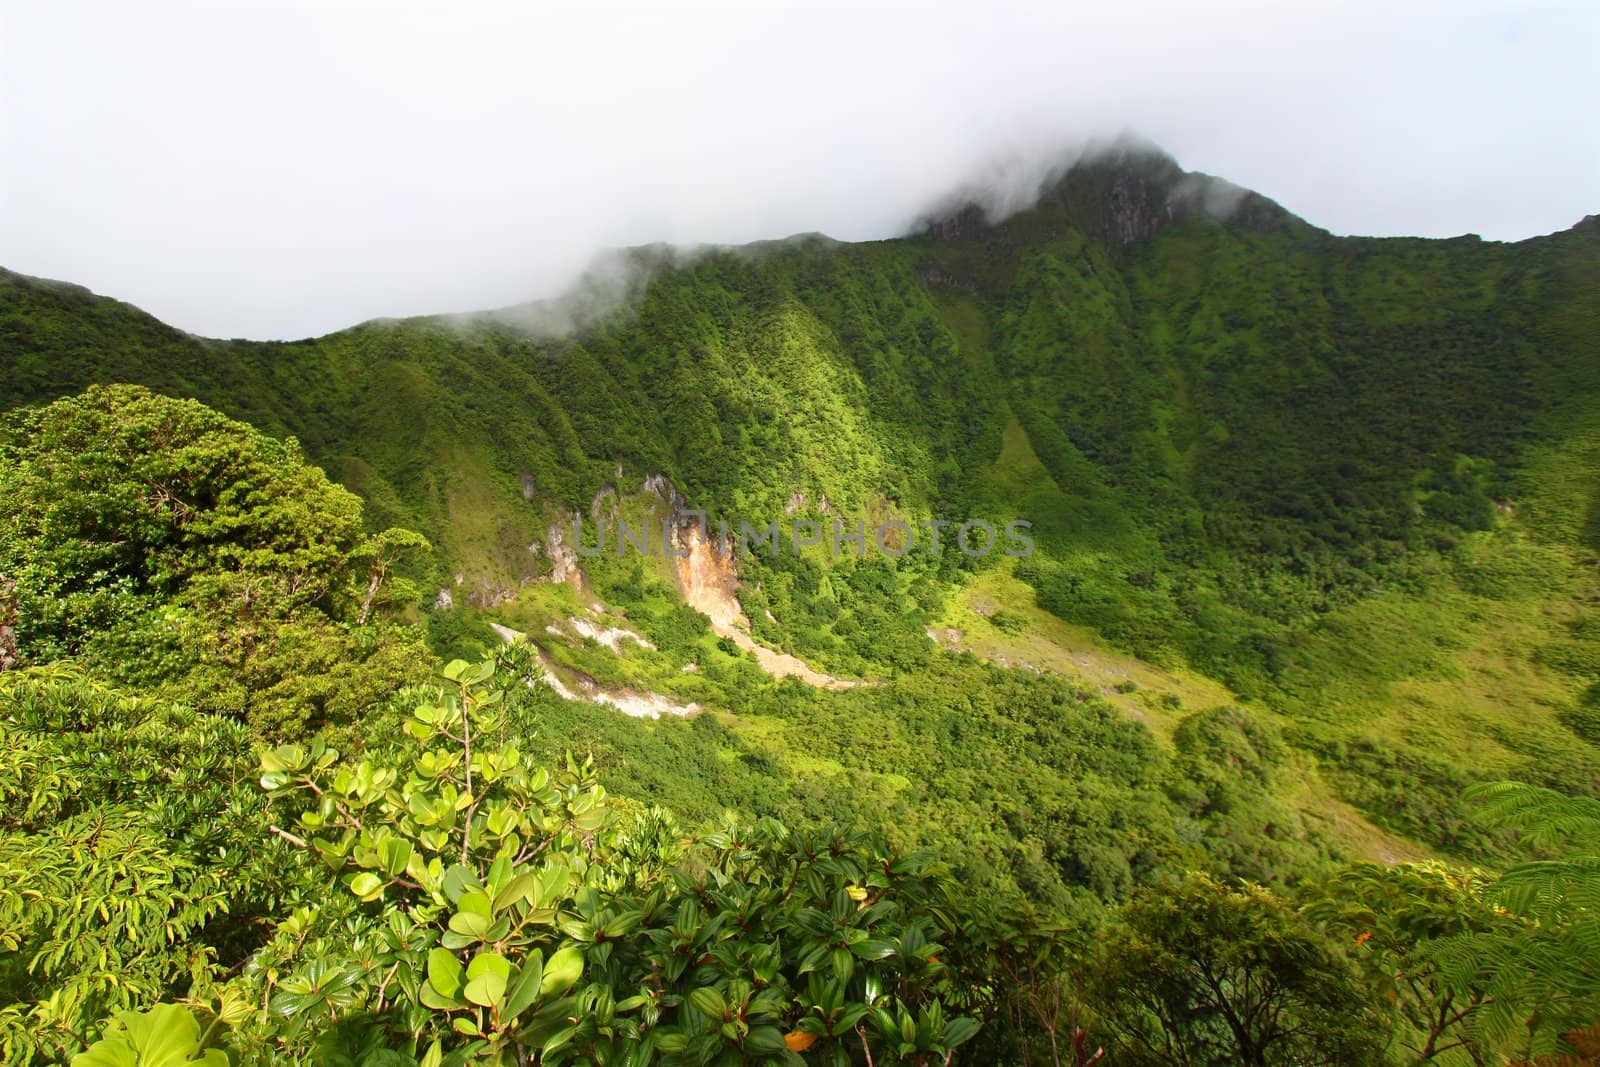 "The Crater" - St Kitts by Wirepec